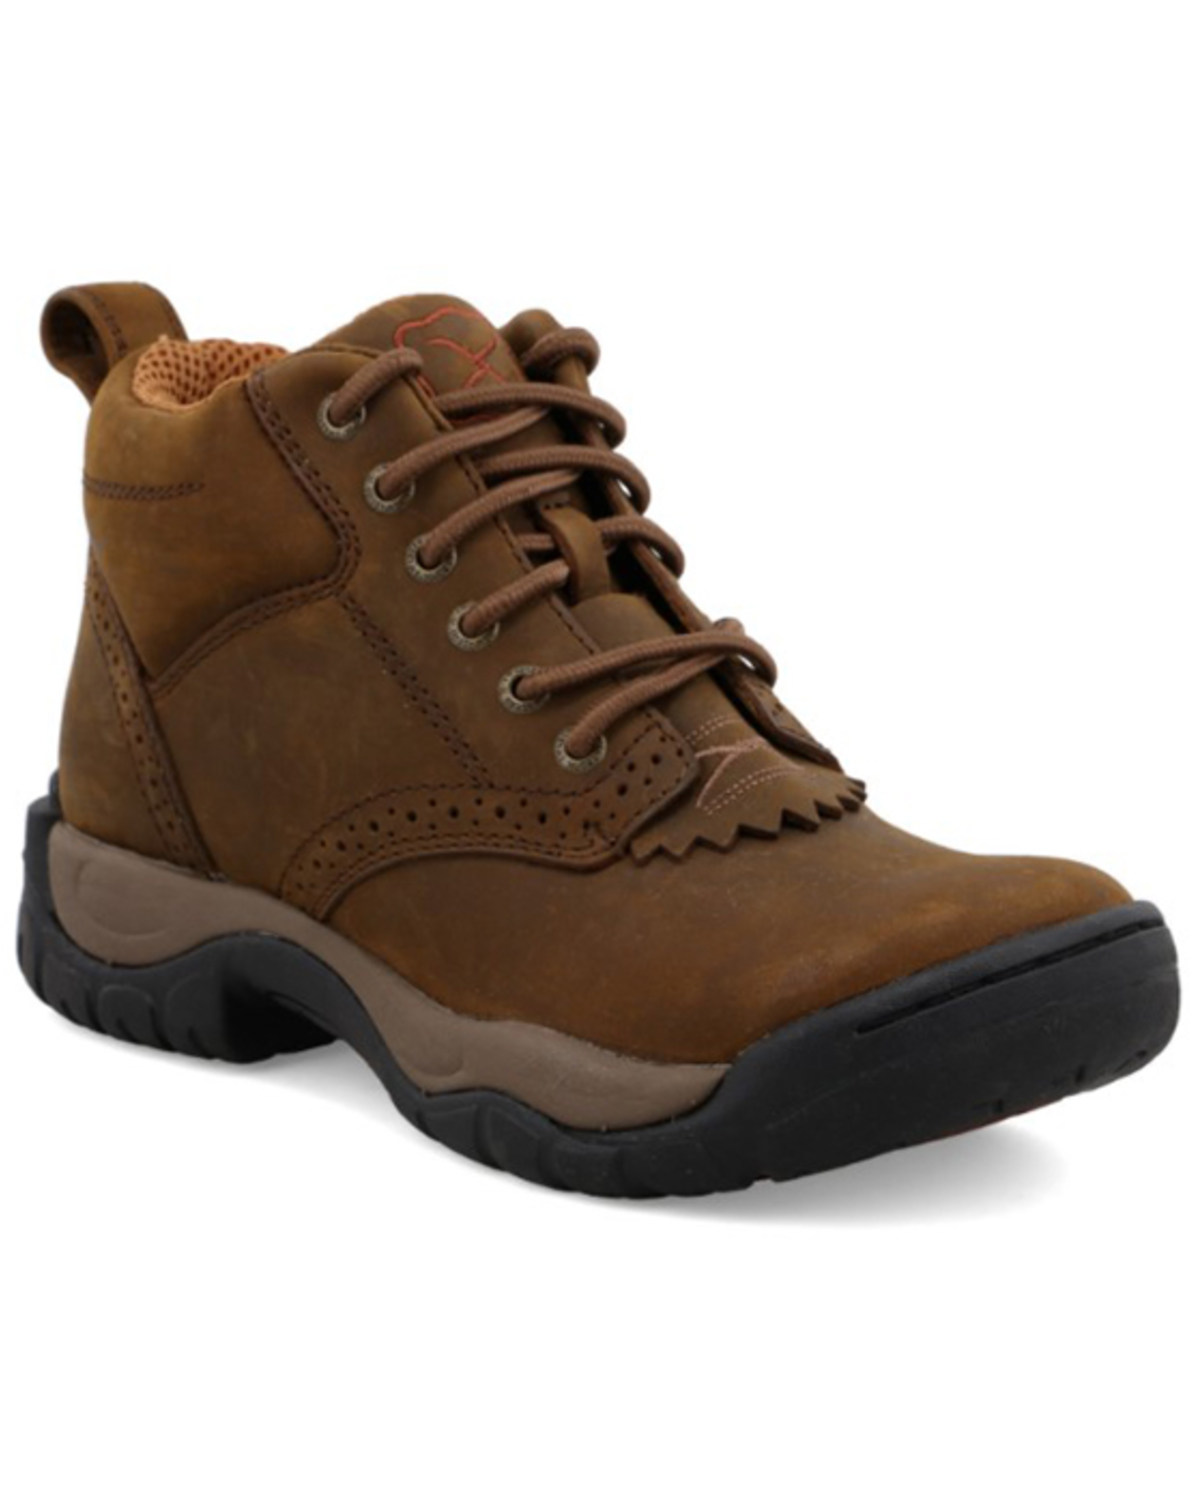 Twisted X Women's Kiltie Lace-Up Hiking Work Boot